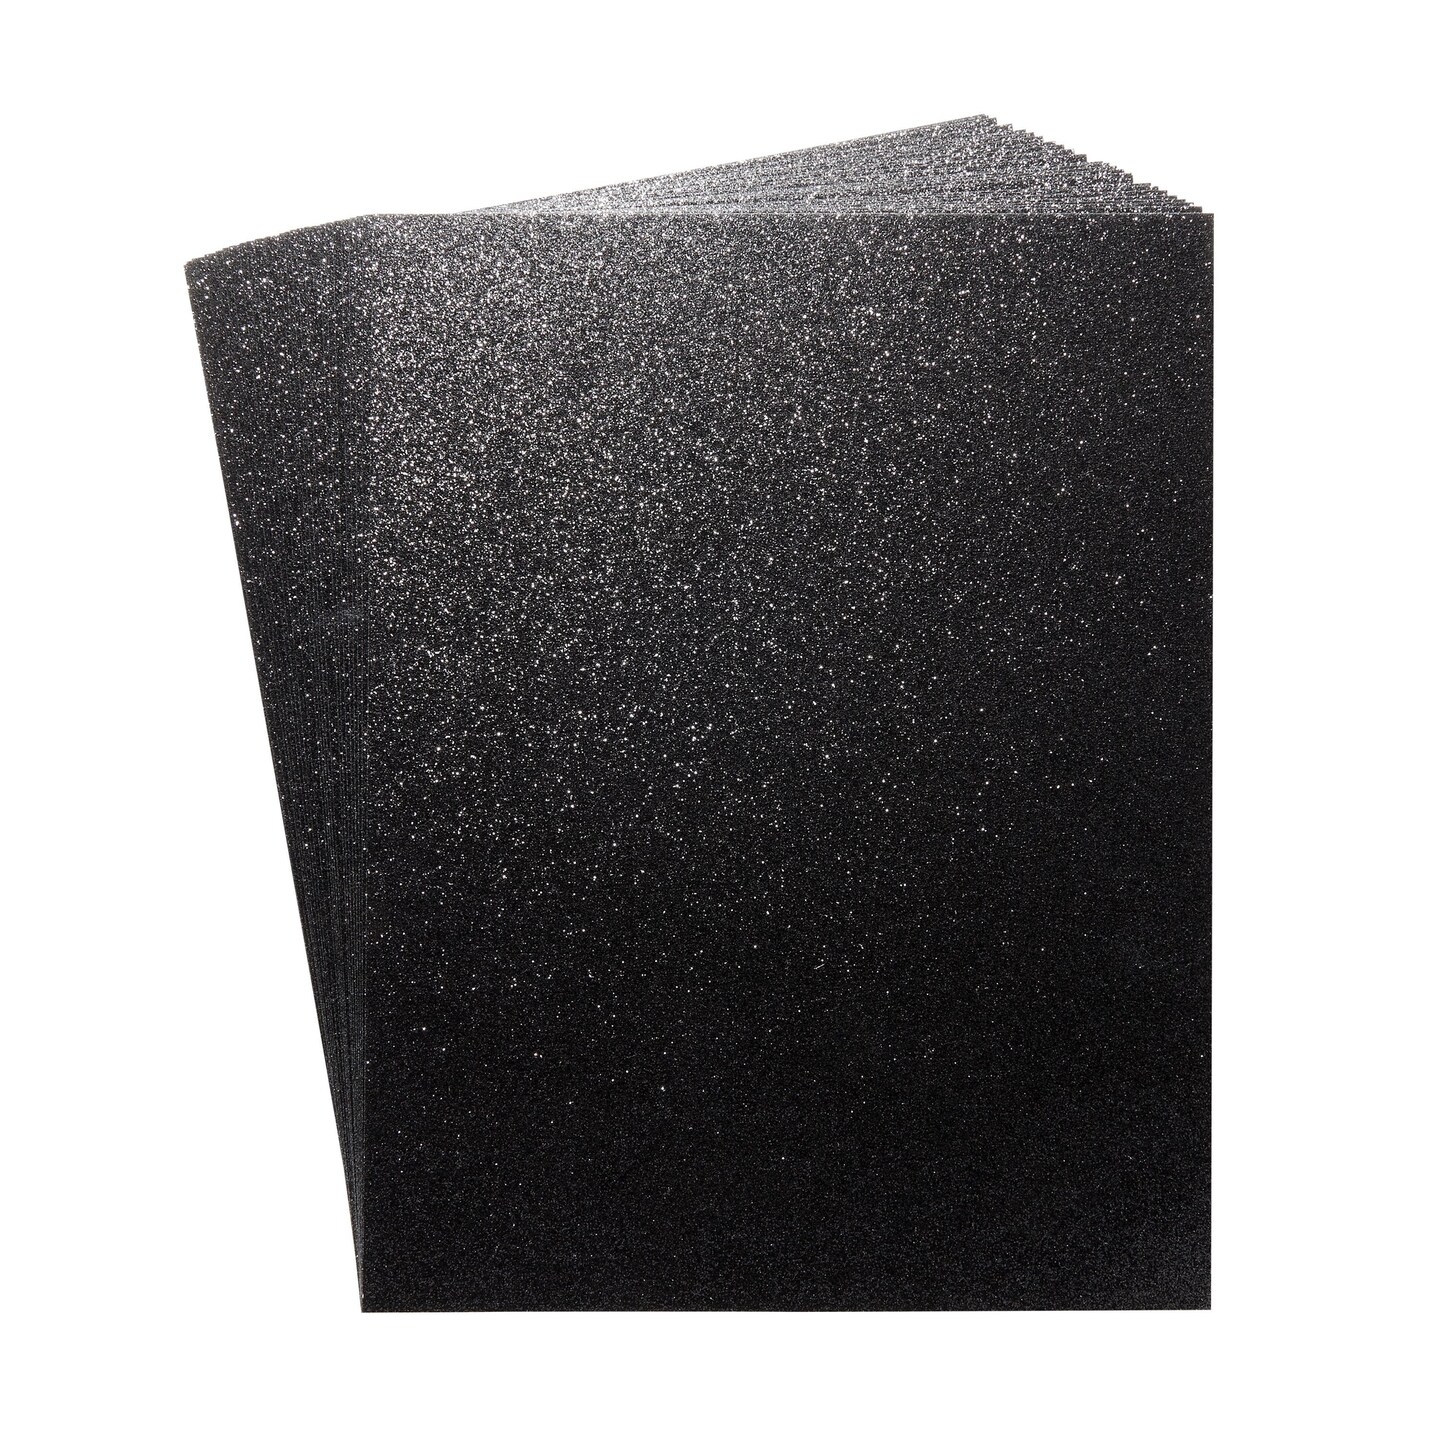 24 Sheets Black Glitter Cardstock Paper for Crafts Birthday Card